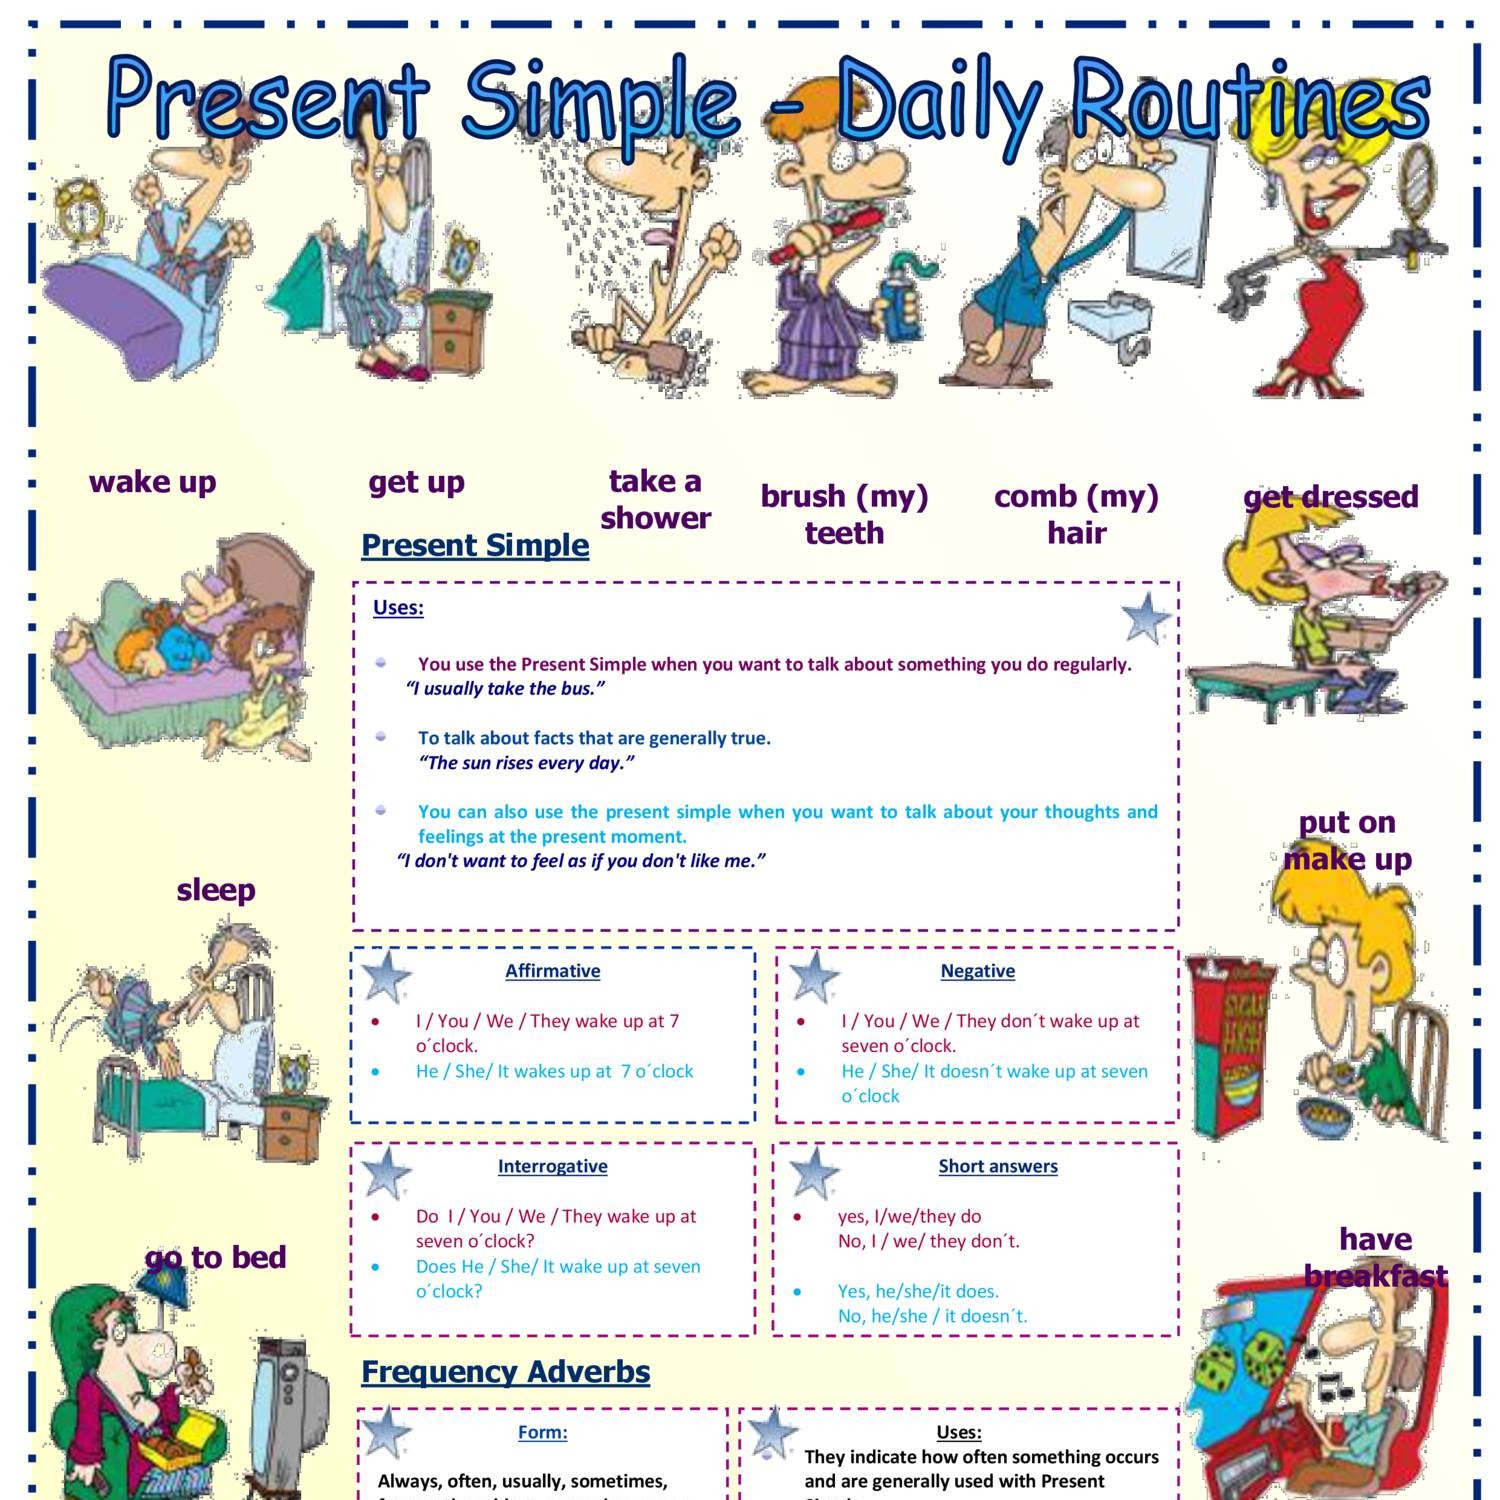 Present simple daily routines frequency adverbs 1 pdf DocDroid